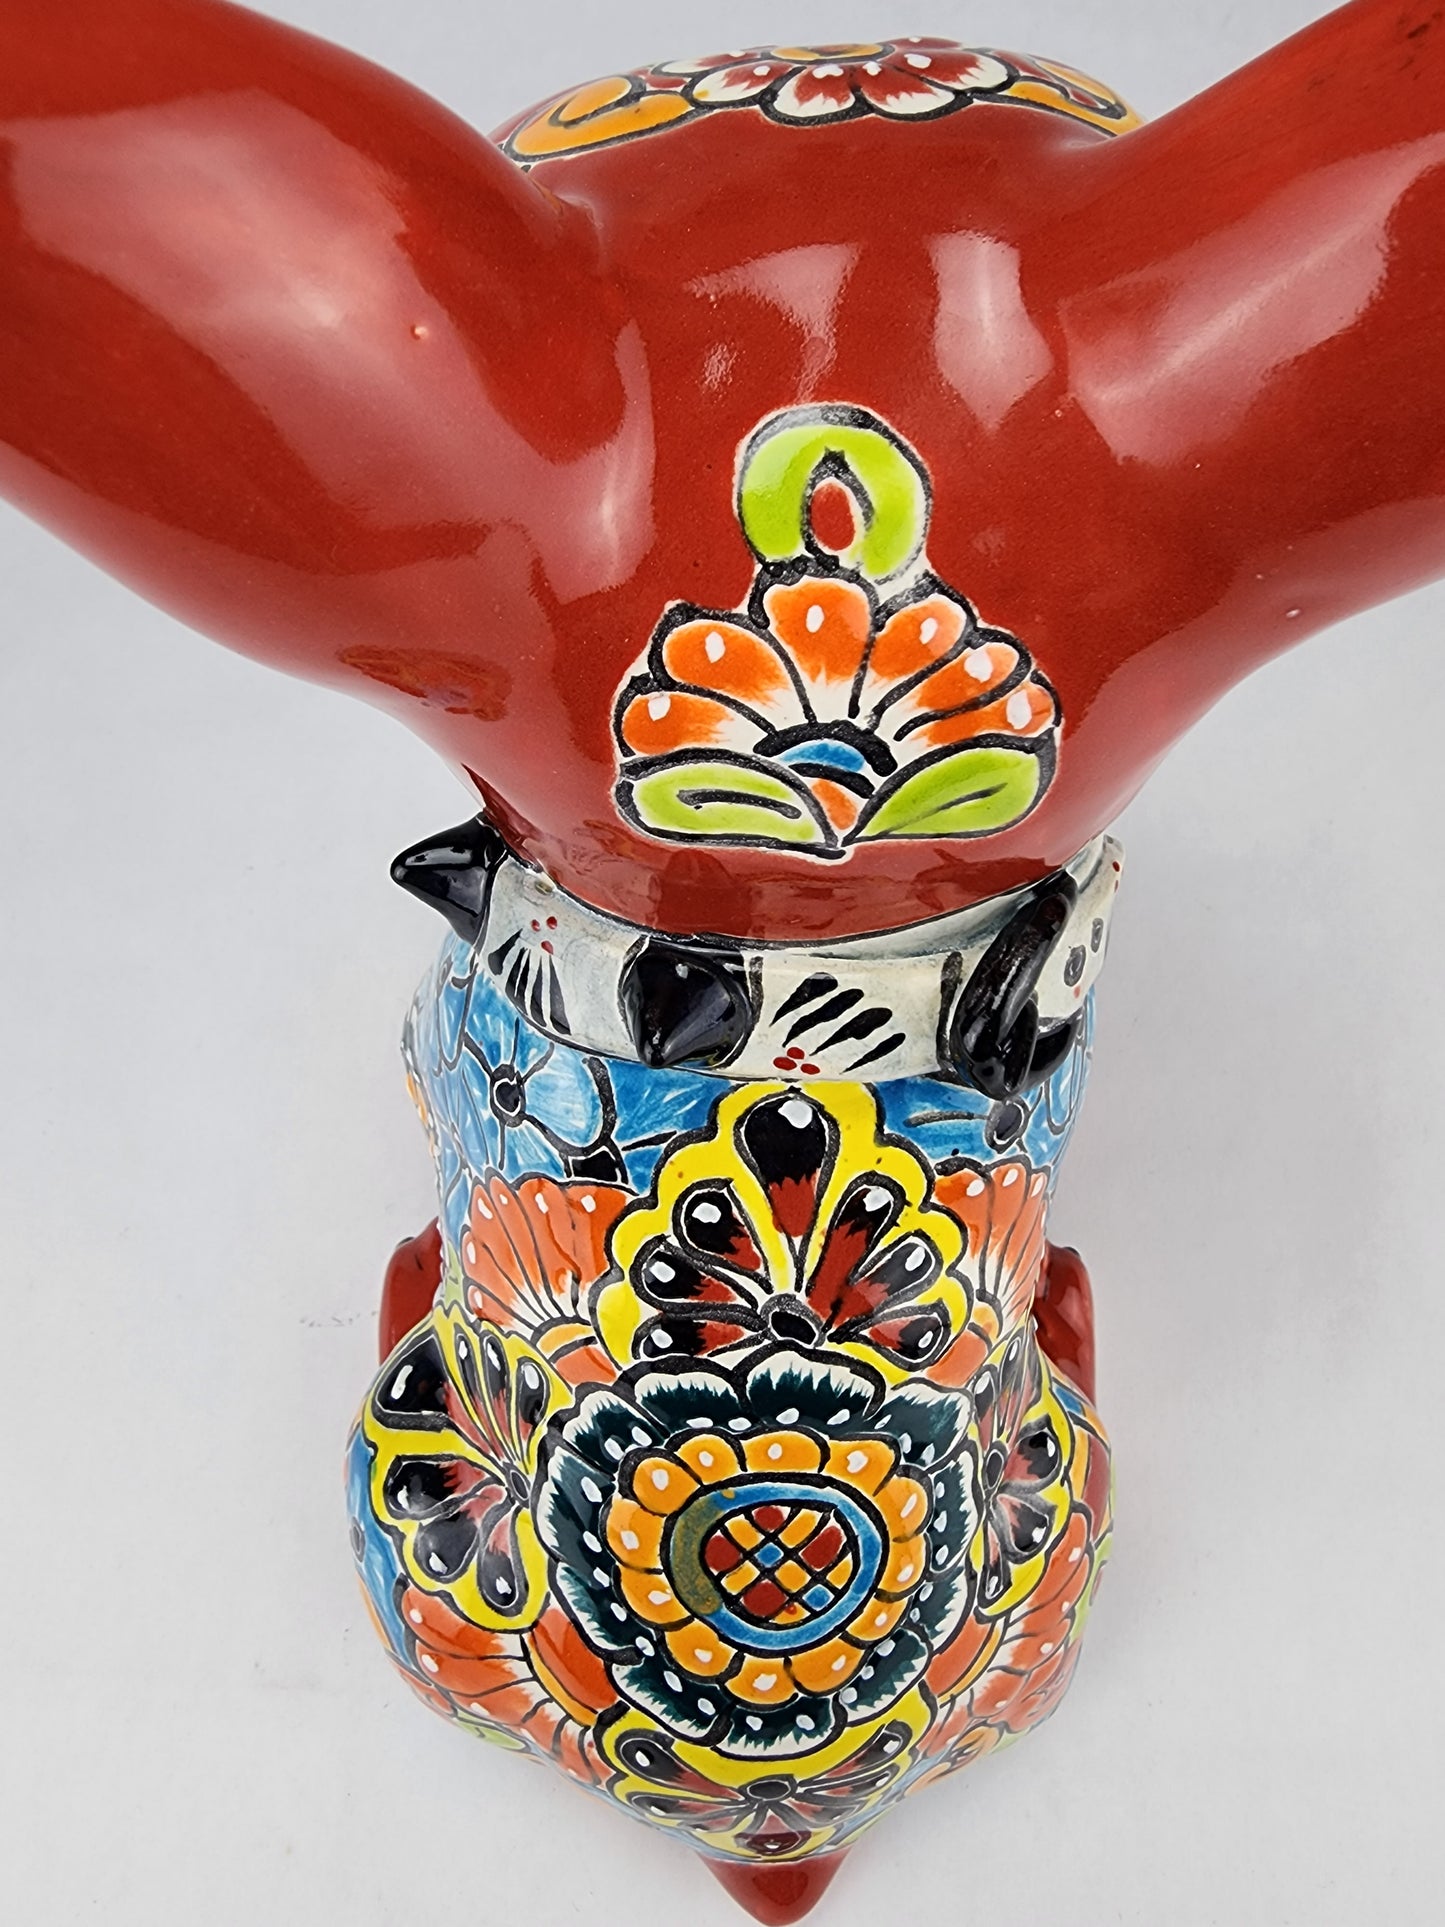 Frenchie Bulldog Hand Painted Talavera Mexican Pottery HEARTRWT